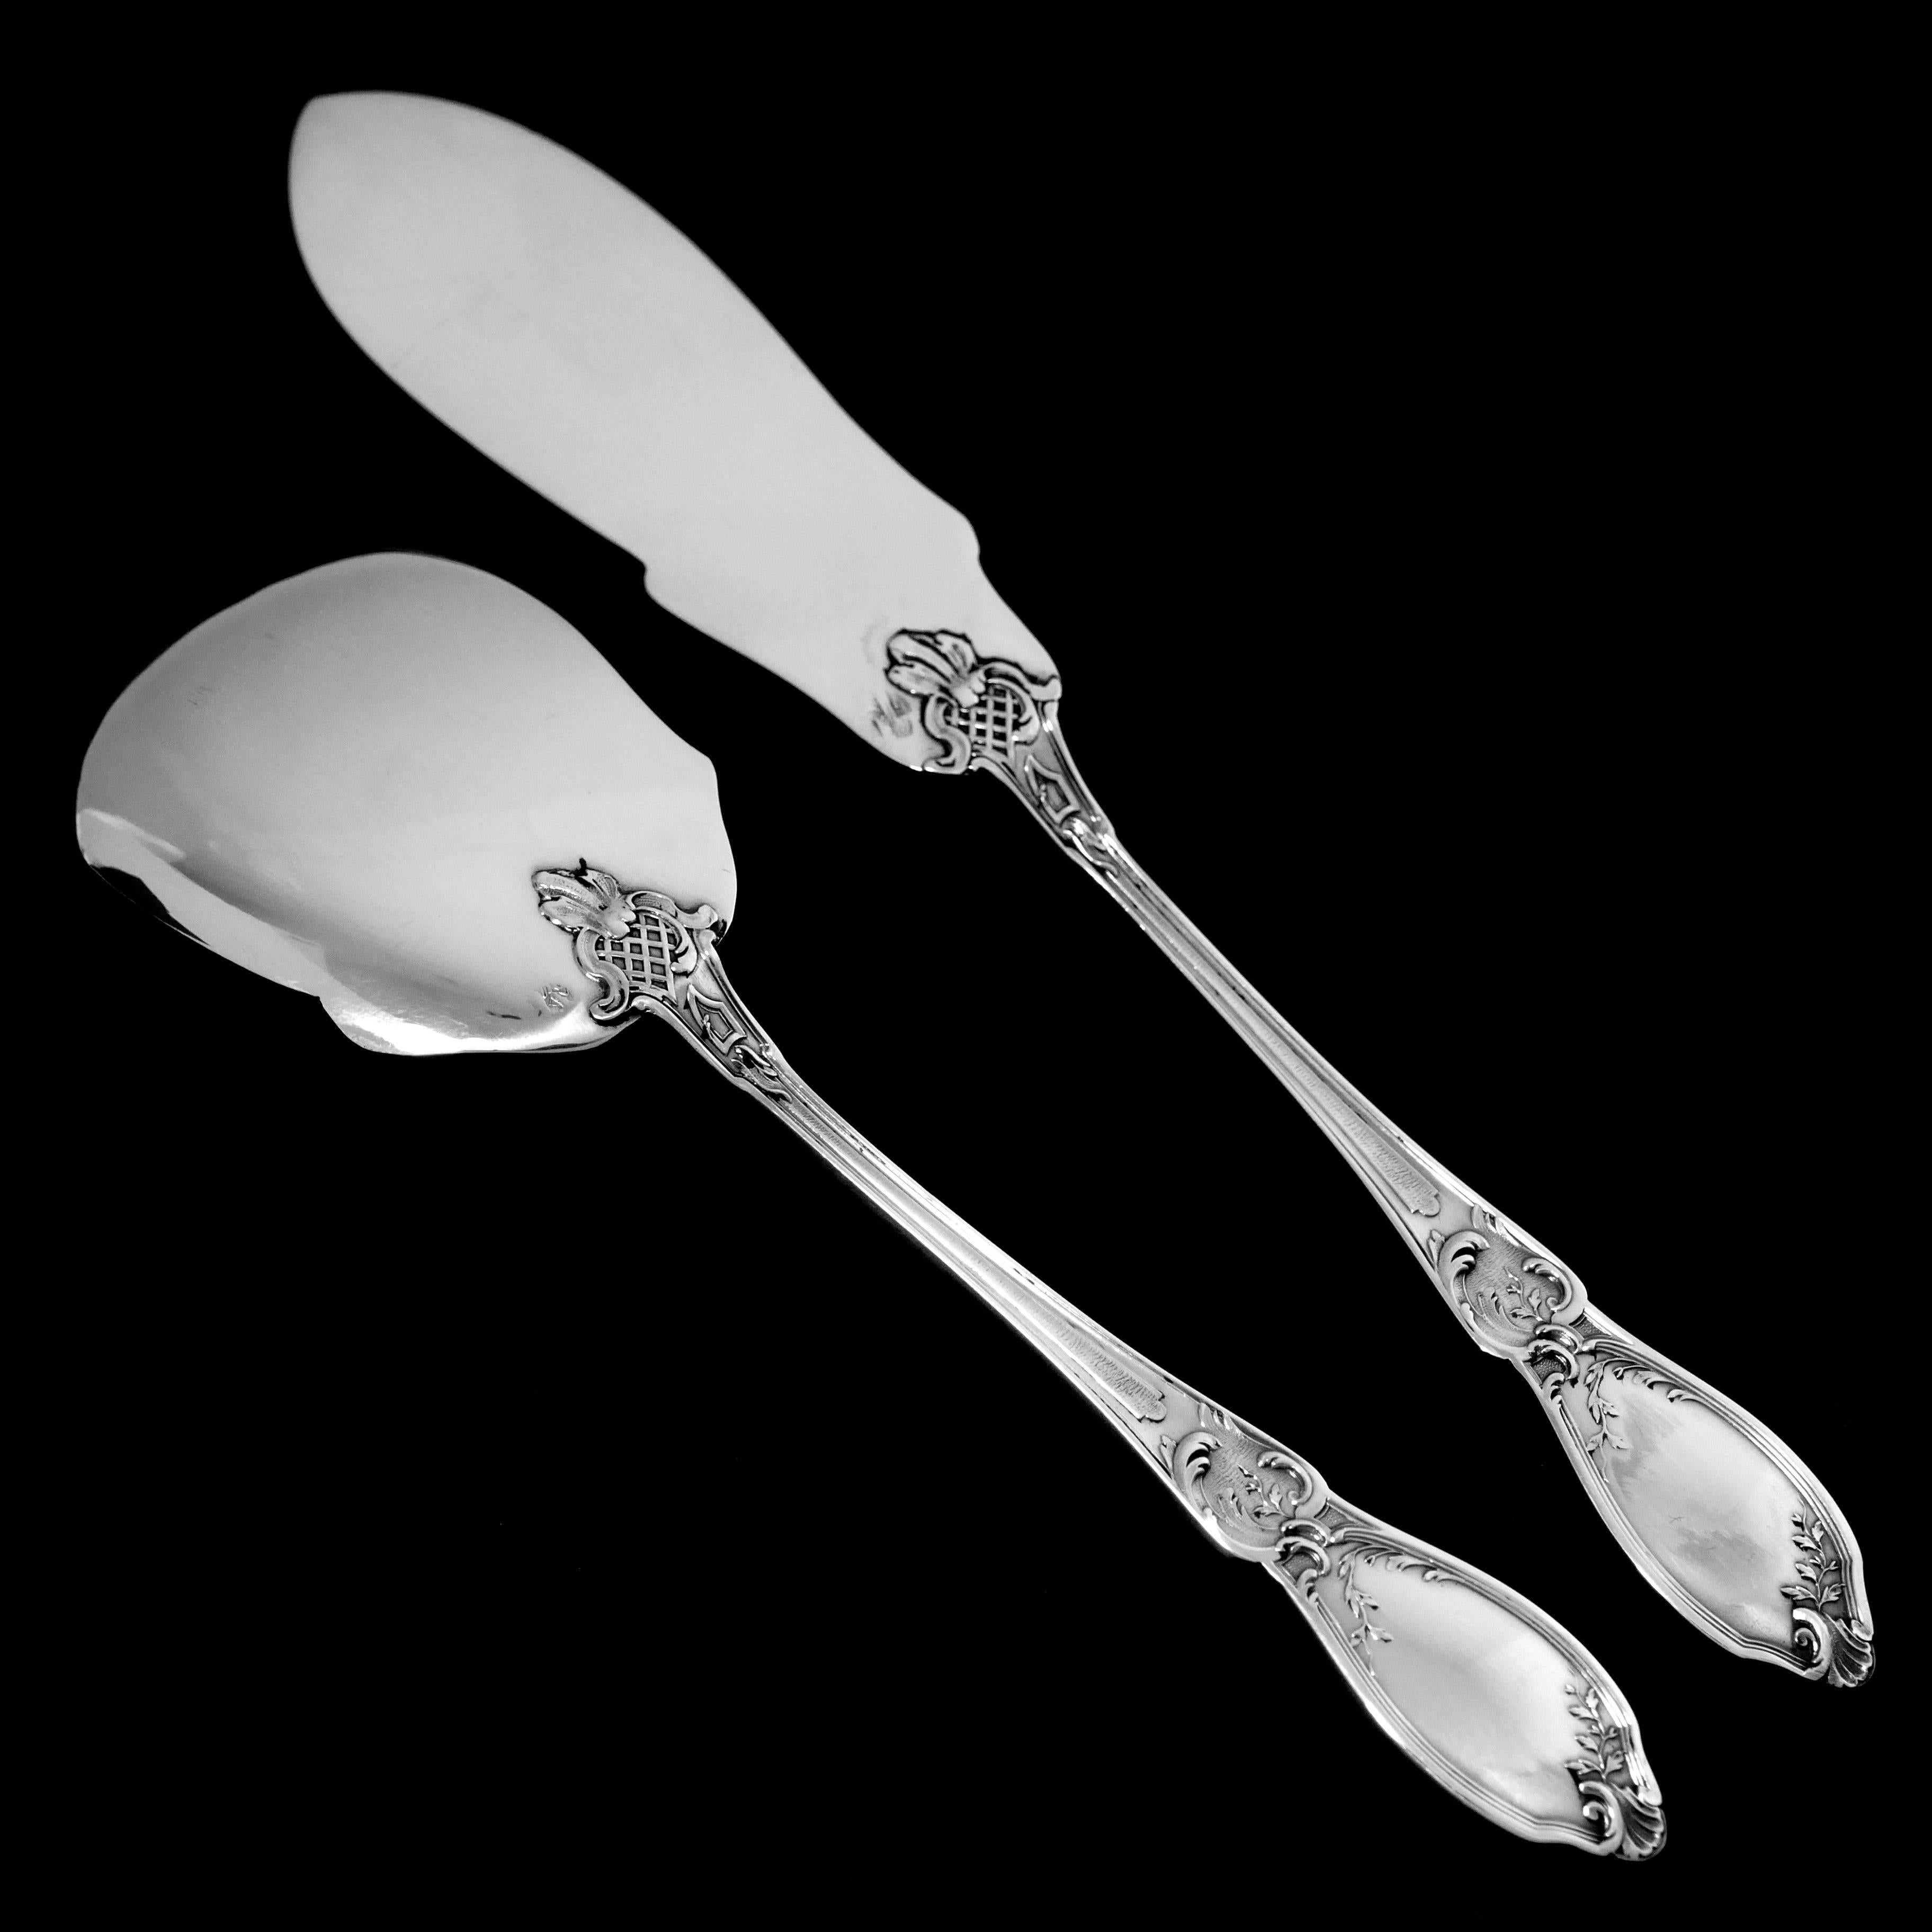 Art Nouveau Doutre Roussel French All Sterling Silver Dessert Hors D'oeuvre Set 4 Pc, Box For Sale